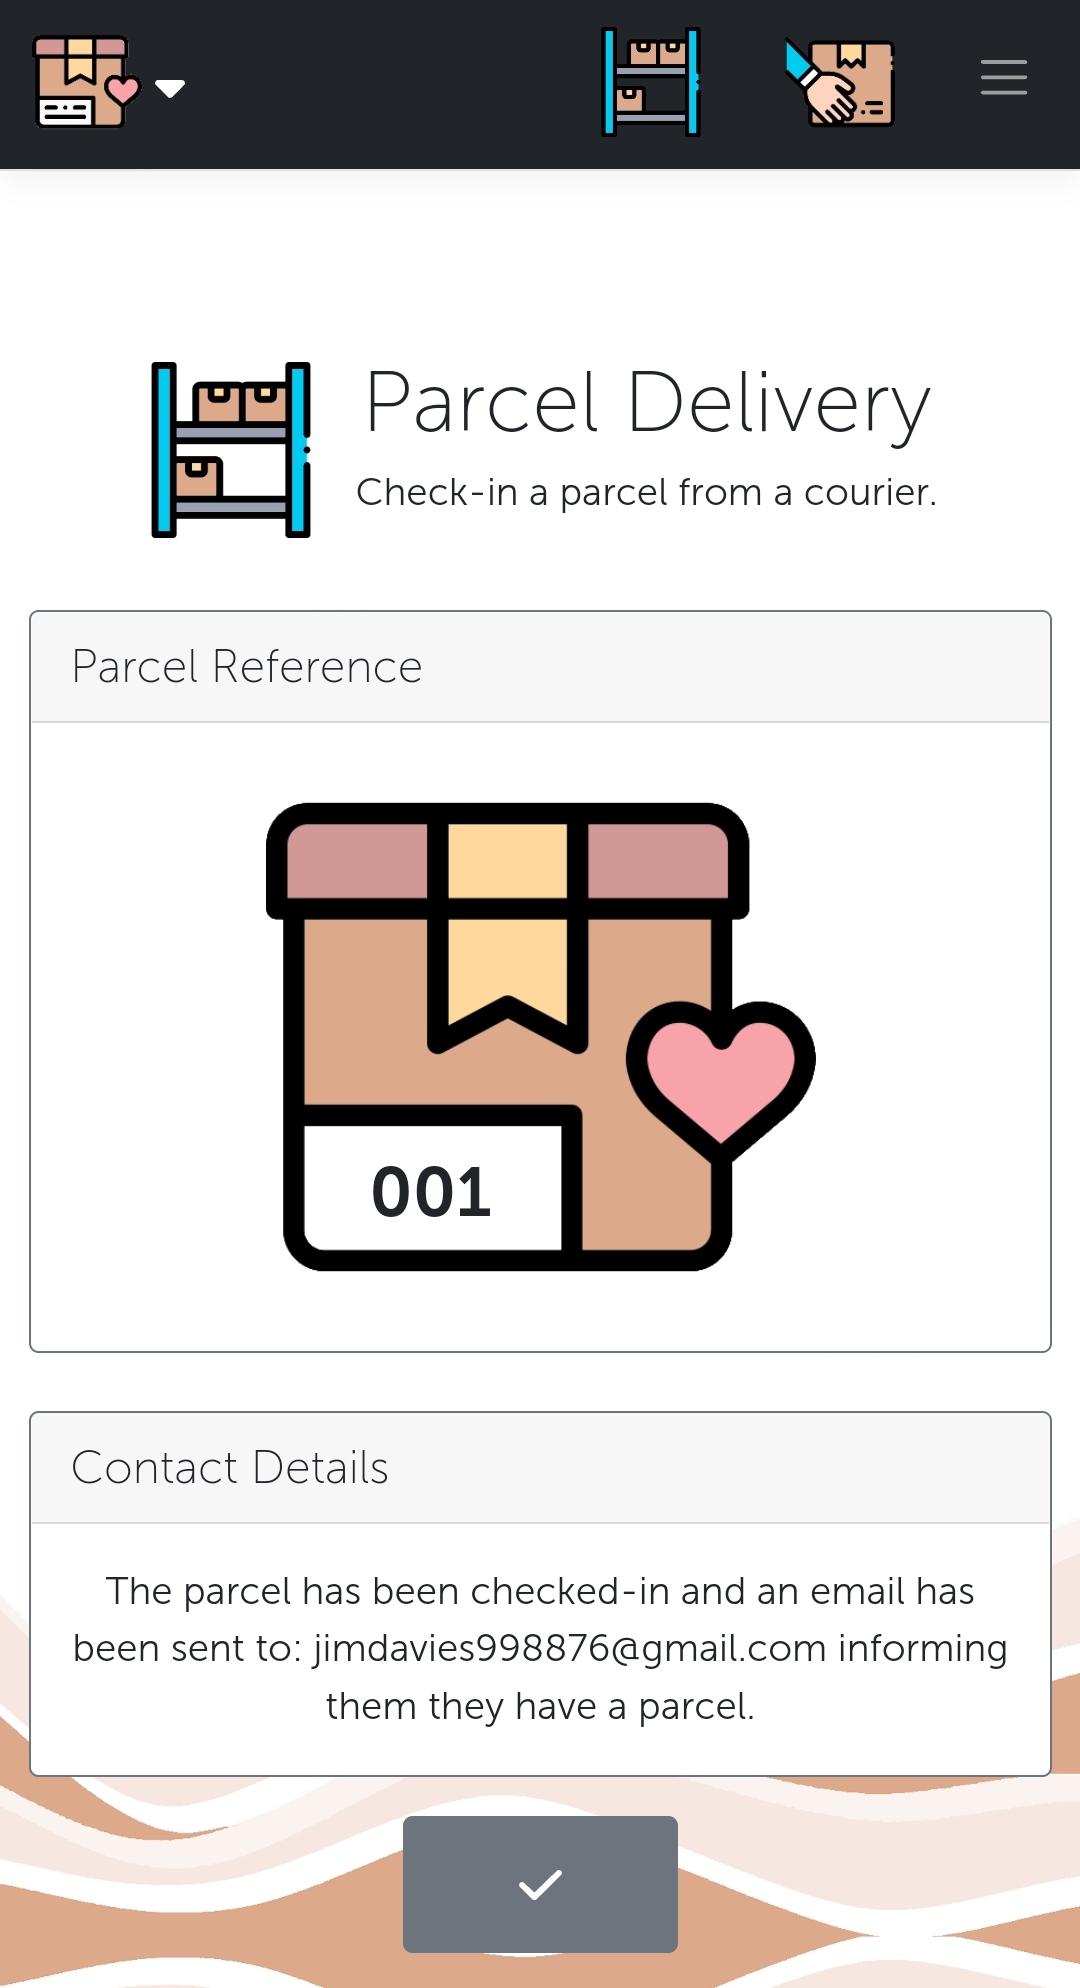 Each parcel get's a unique number. You can either write this on the parcel direct or attach a pre-printed label. This will allow you to find the parcel in your mailroom quickly on collection.